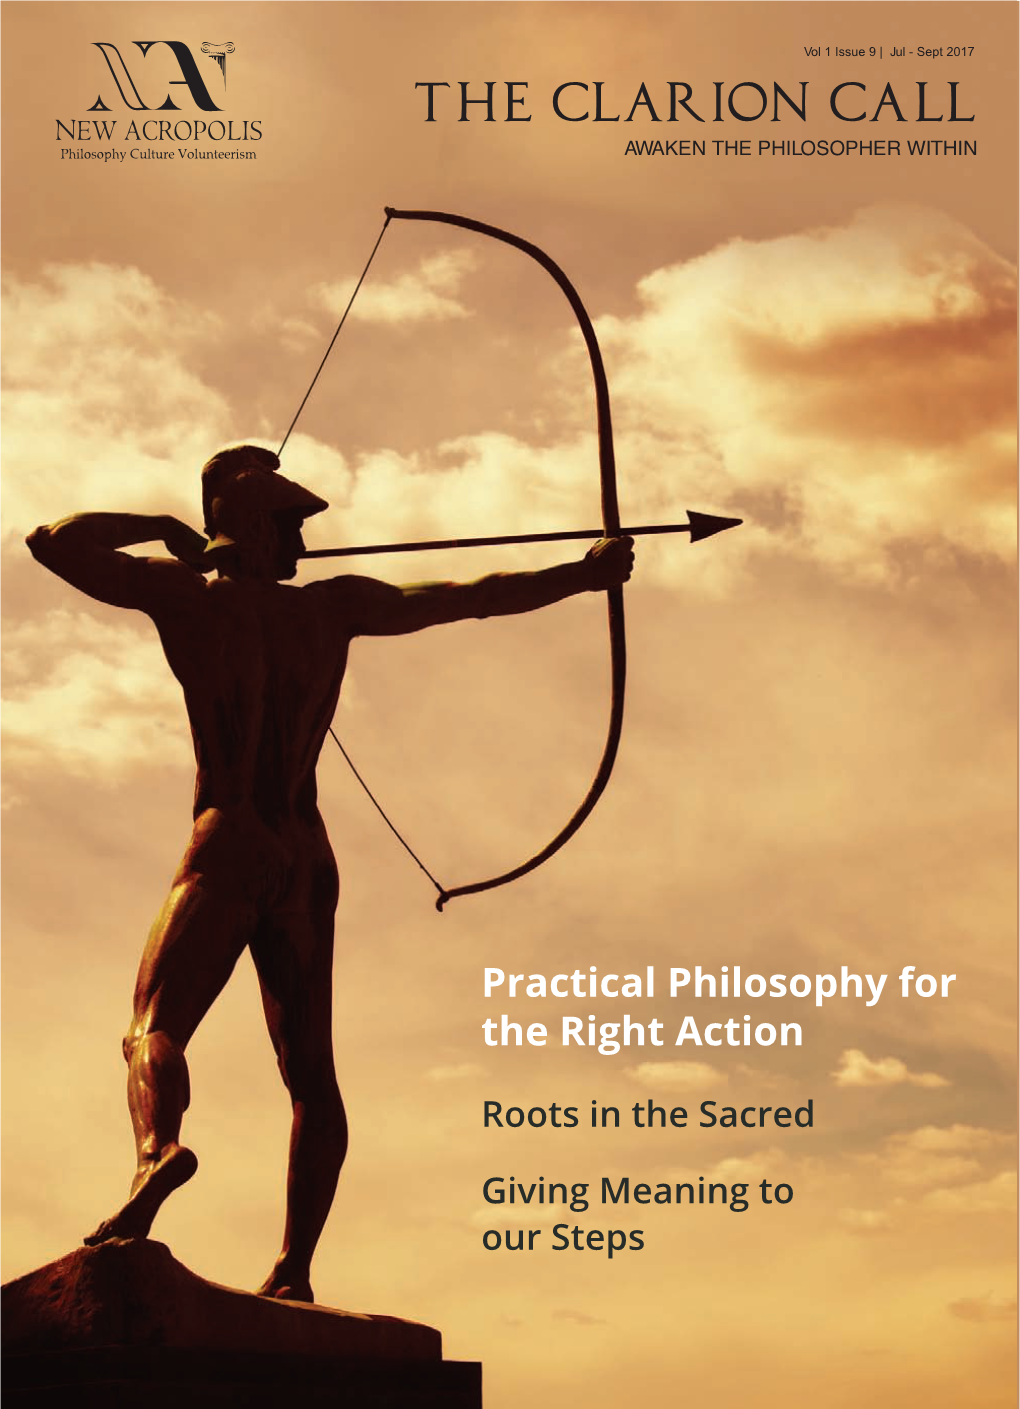 Practical Philosophy for the Right Action